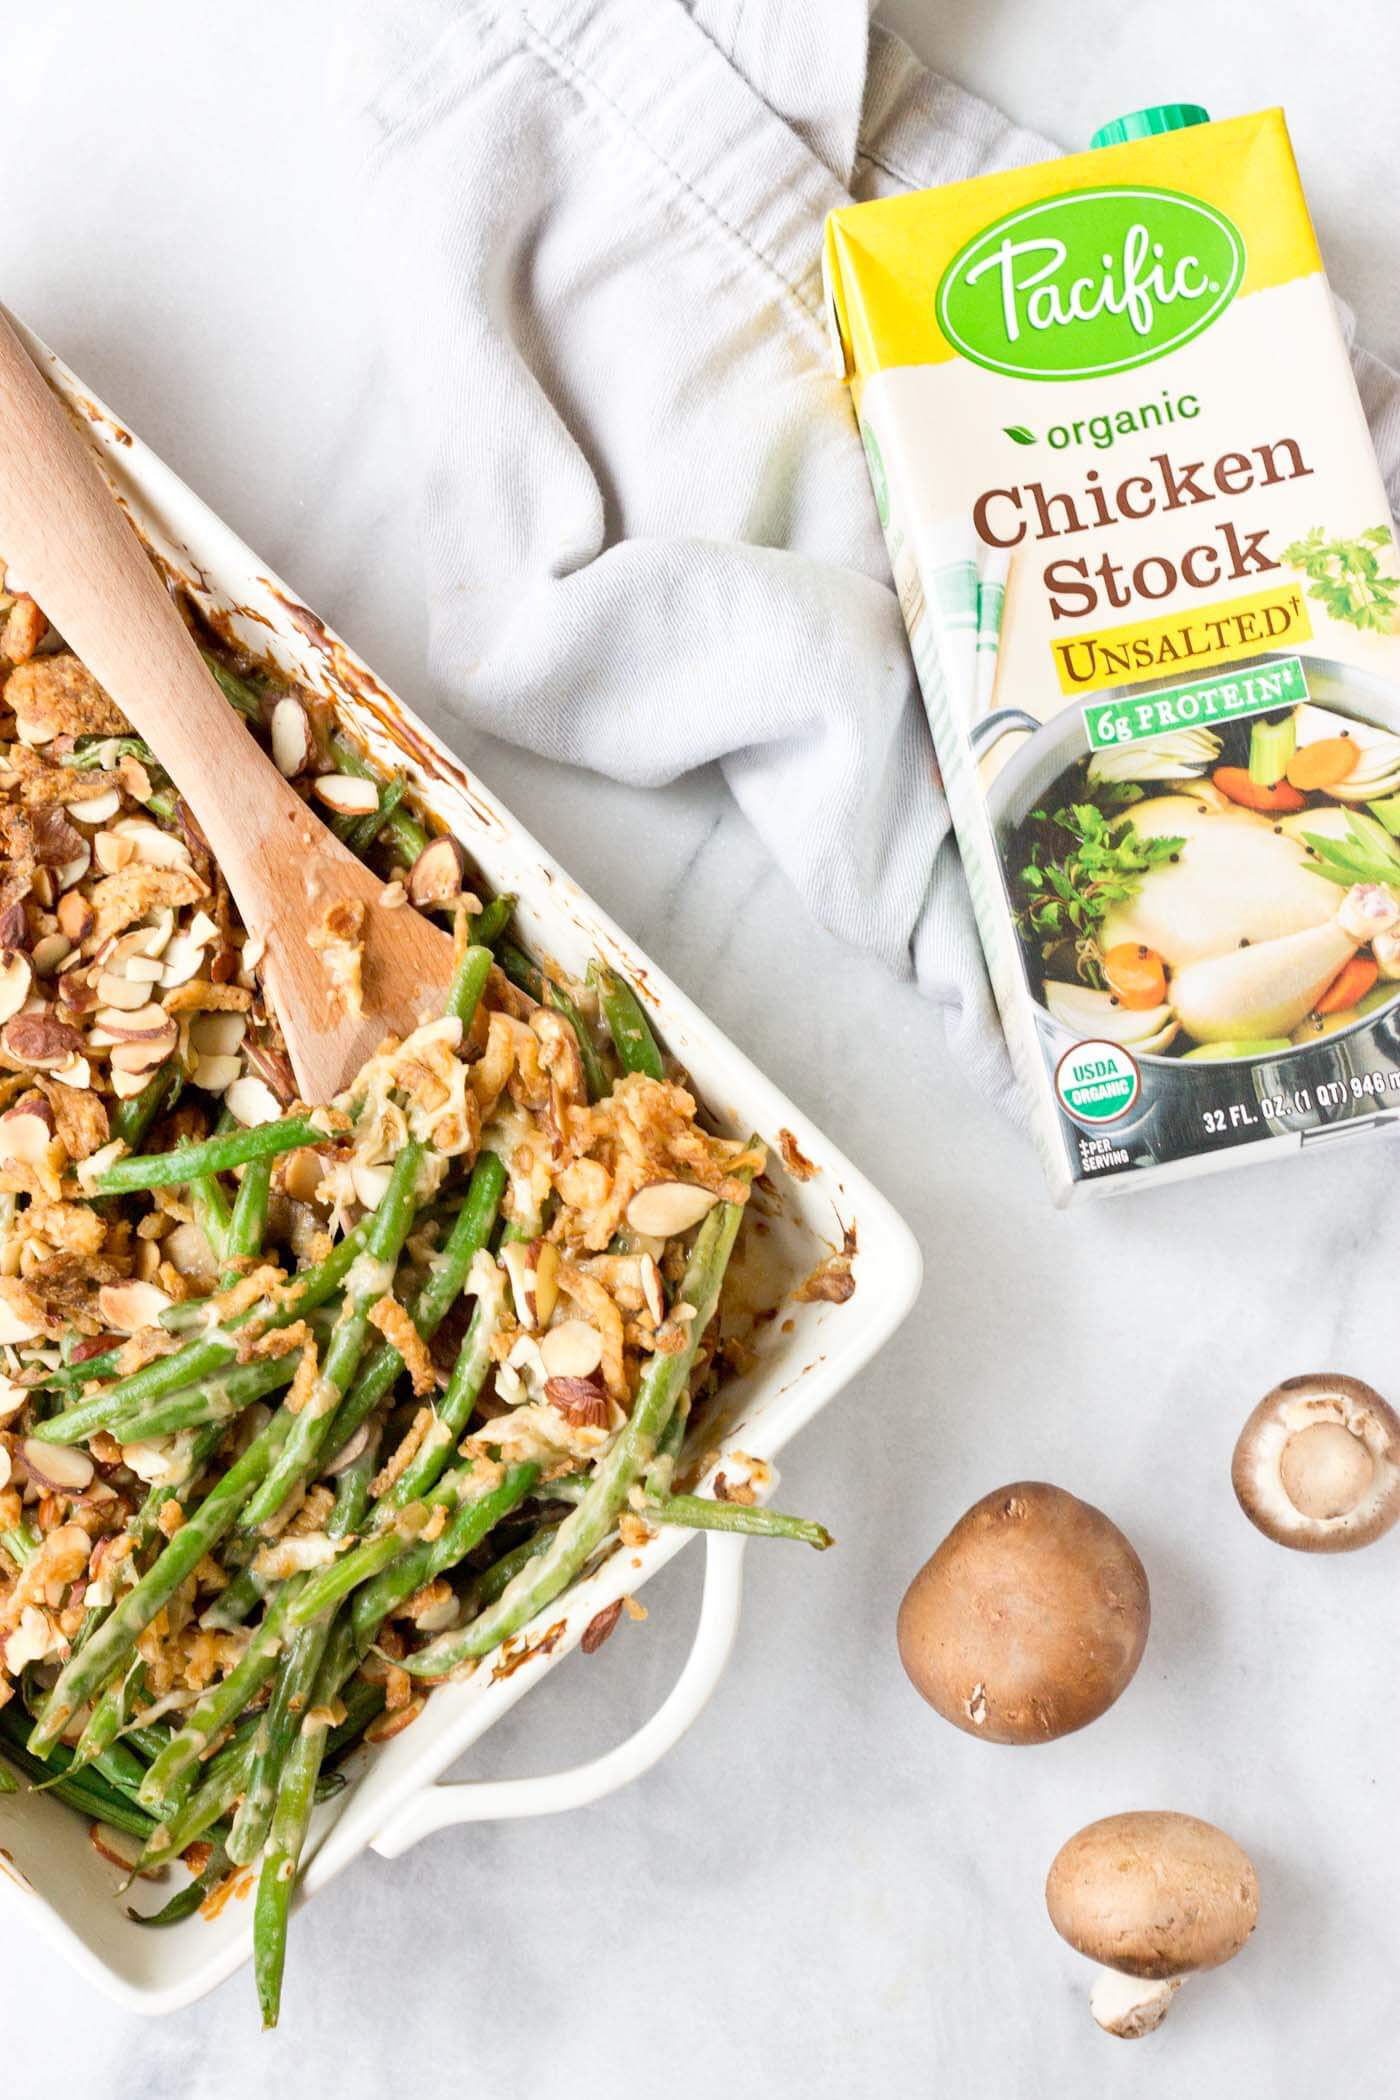 Because we all need Green Bean Casserole in our lives. This is recipe is easy and made with homemade cream of mushroom soup + au gratin topping! Extra crunchies, please!